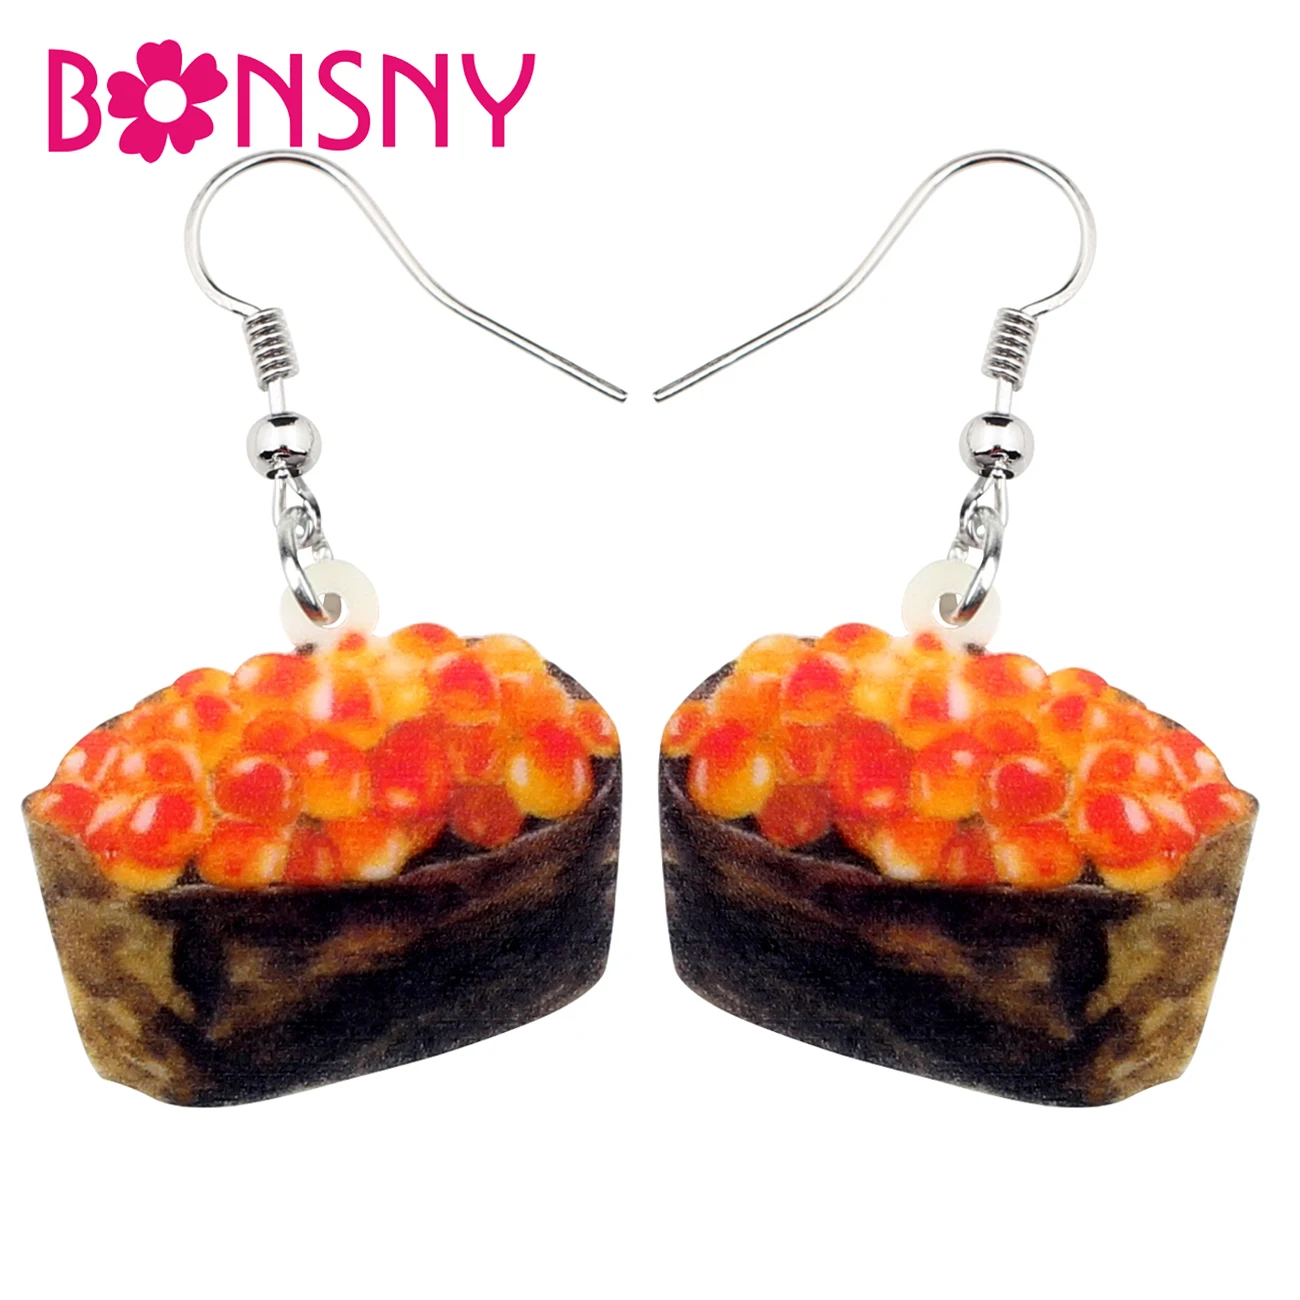 

Bonsny Acrylic Delicious Japanese Roe Sushi Earrings Drop Dangle Unique Design Food Jewelry For Women Girls Teens Charms Brincos